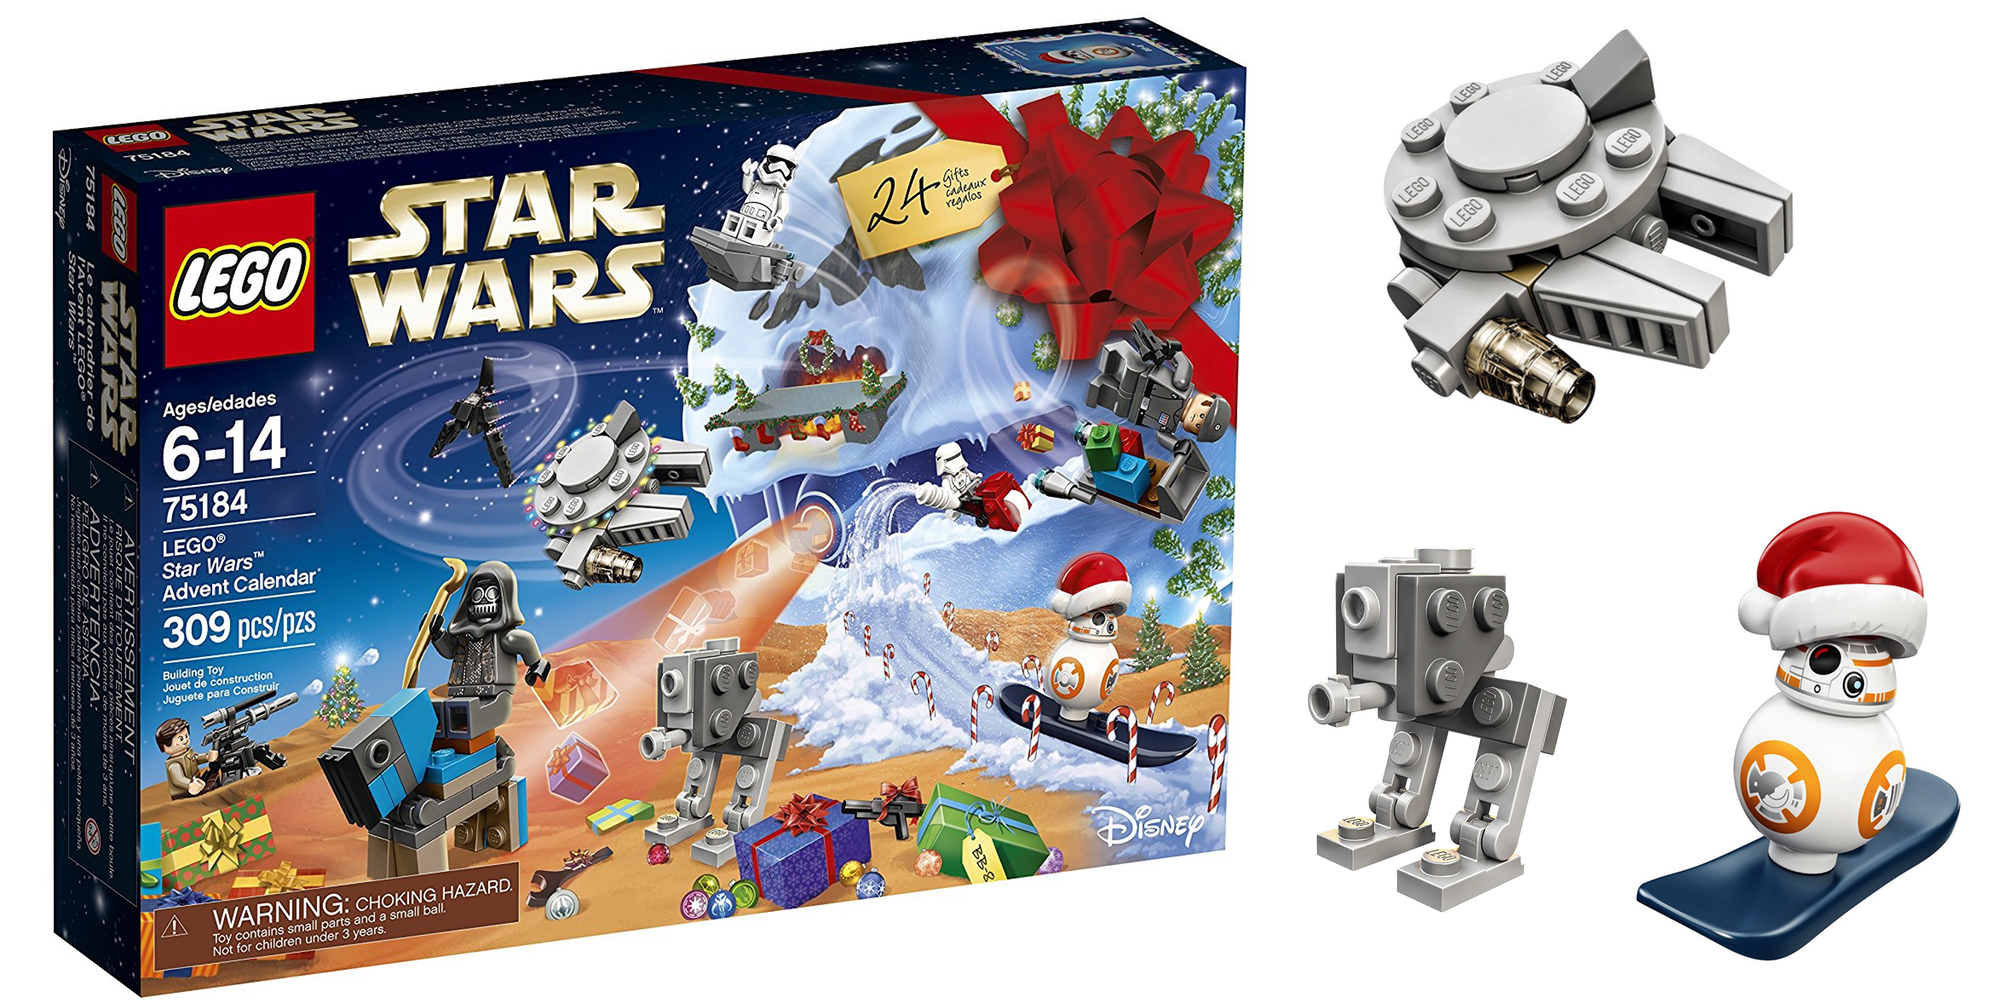 Count down to the holidays with the LEGO Star Wars Advent Calendar for